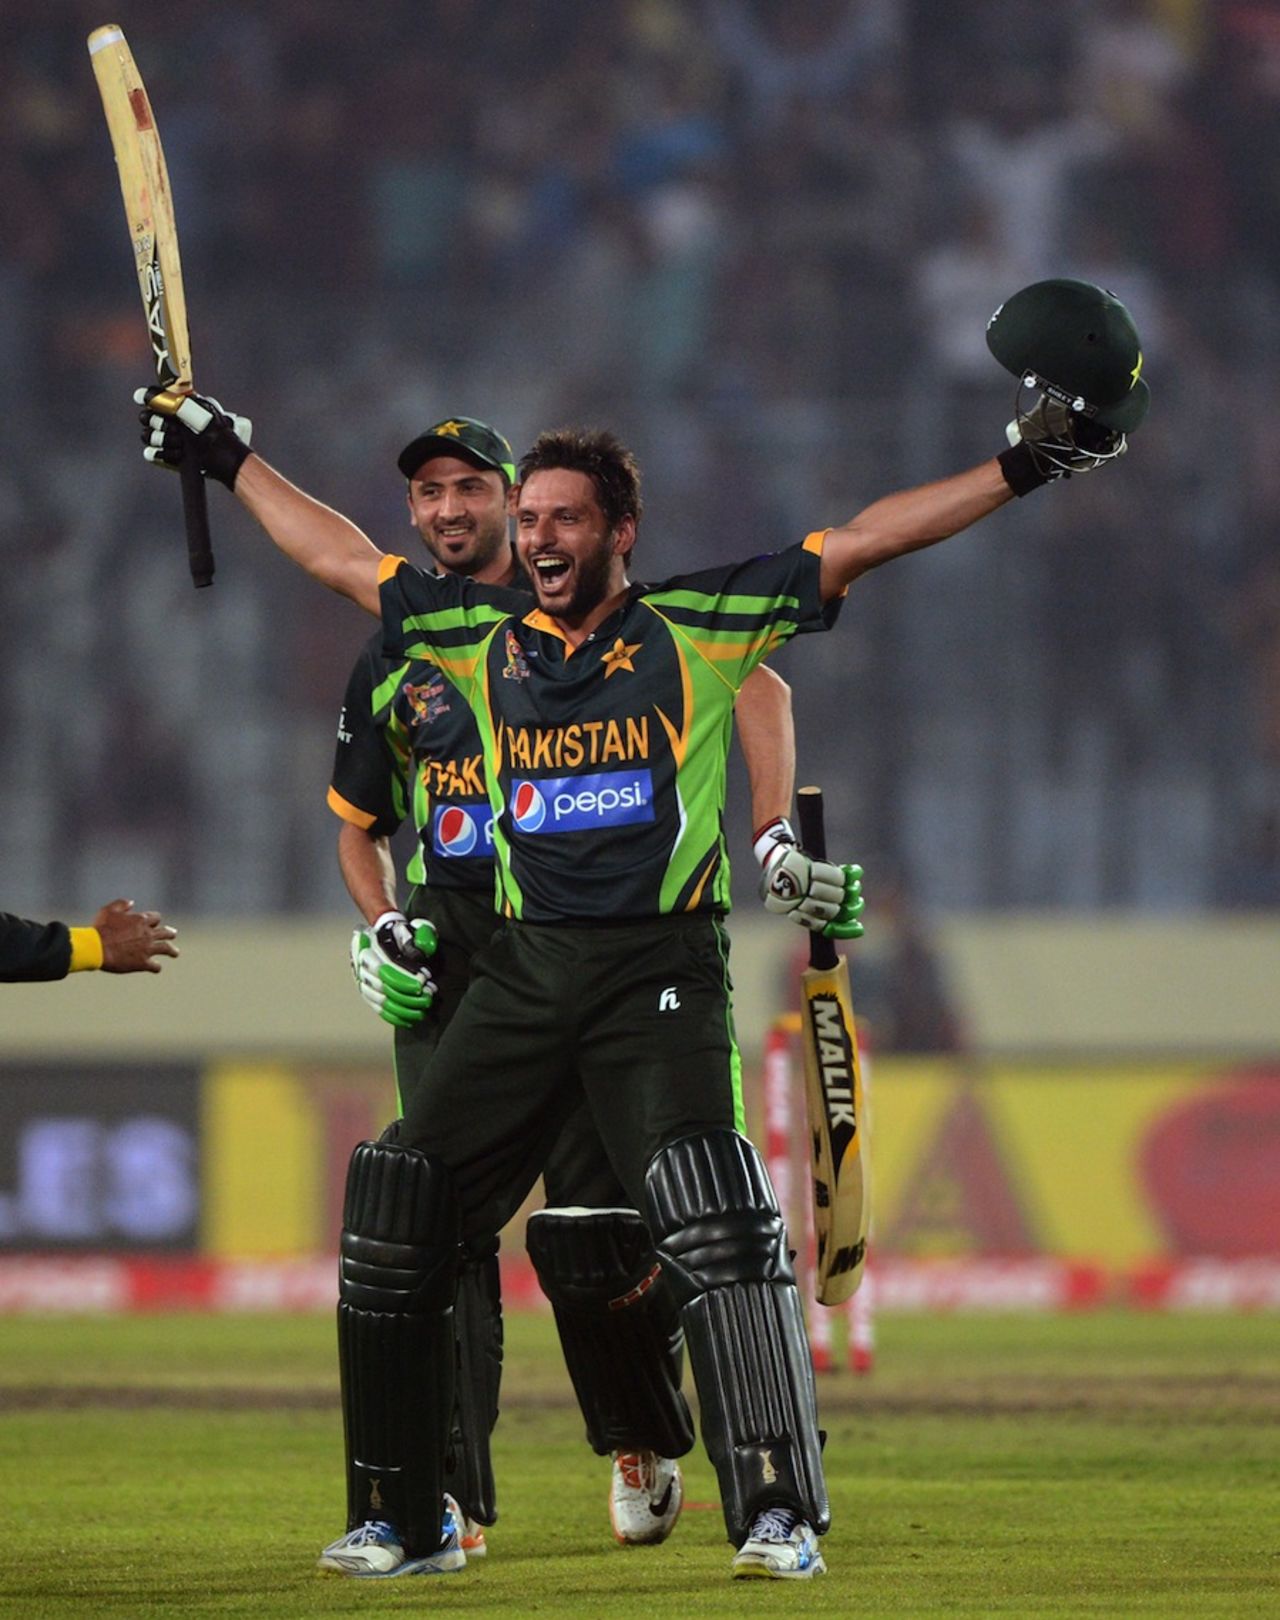 Shahid Afridi is joined by team-mates after winning the match, India v Pakistan, Asia Cup, Mirpur, March 2, 2014